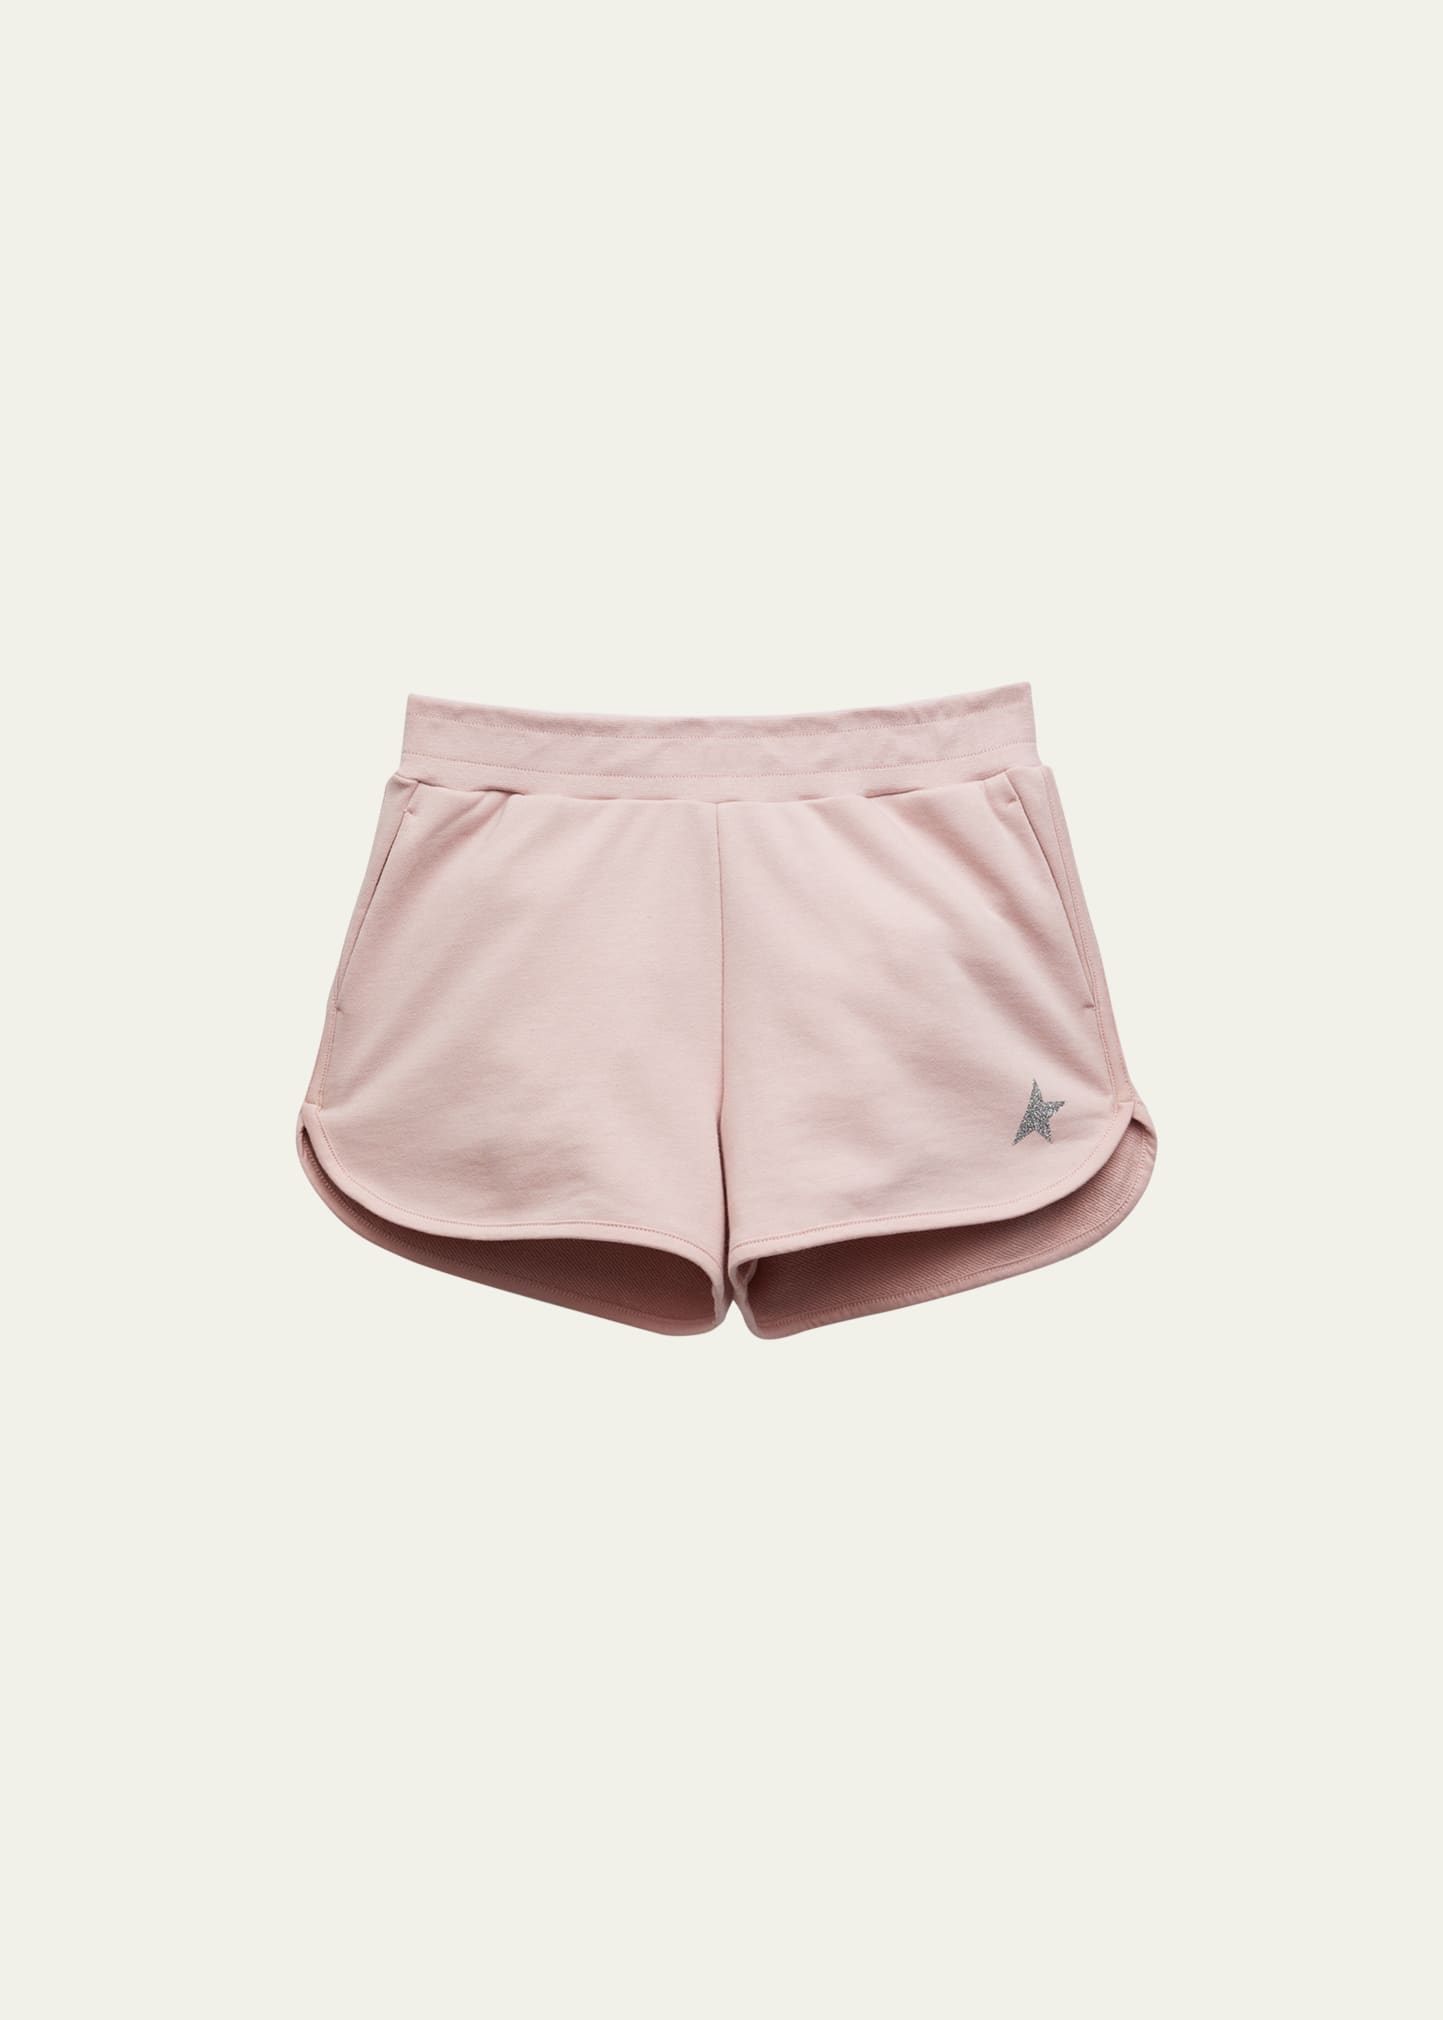 Golden Goose Kids' Small Star Shorts In Pink